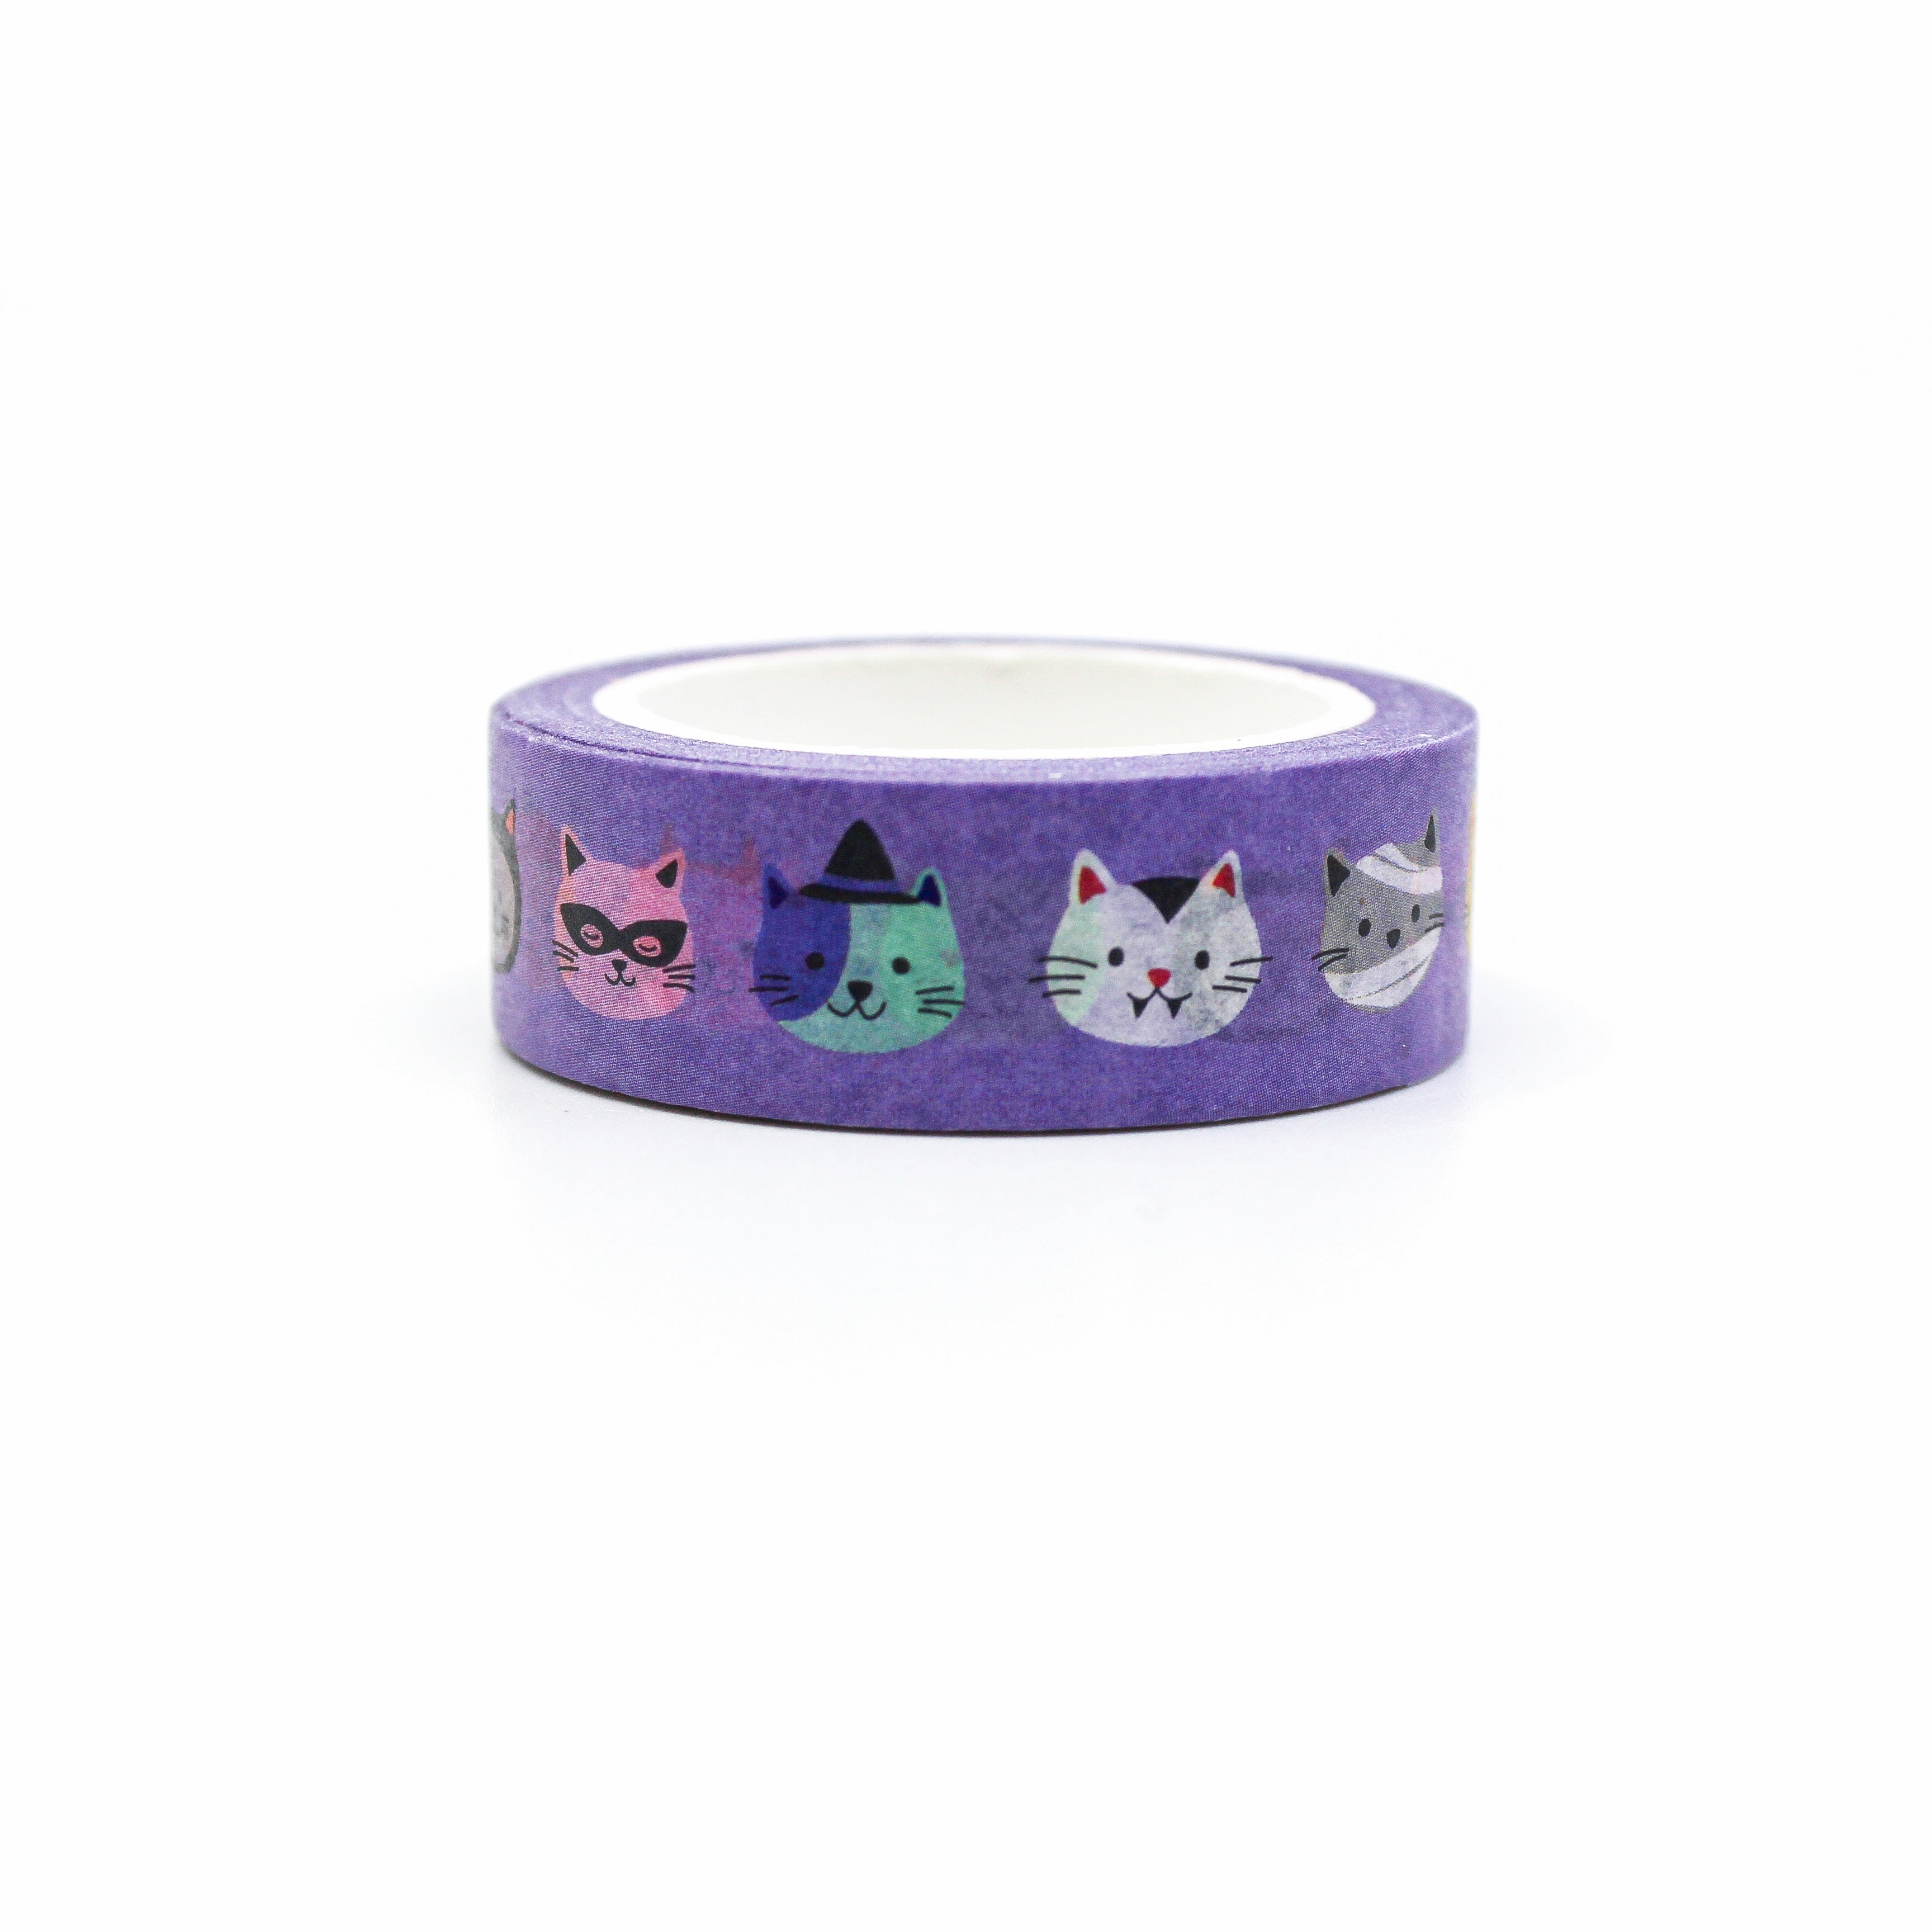 This is a smiling faces of cat themed Halloween costumes view of washi tape from BBB Supplies Craft Shop